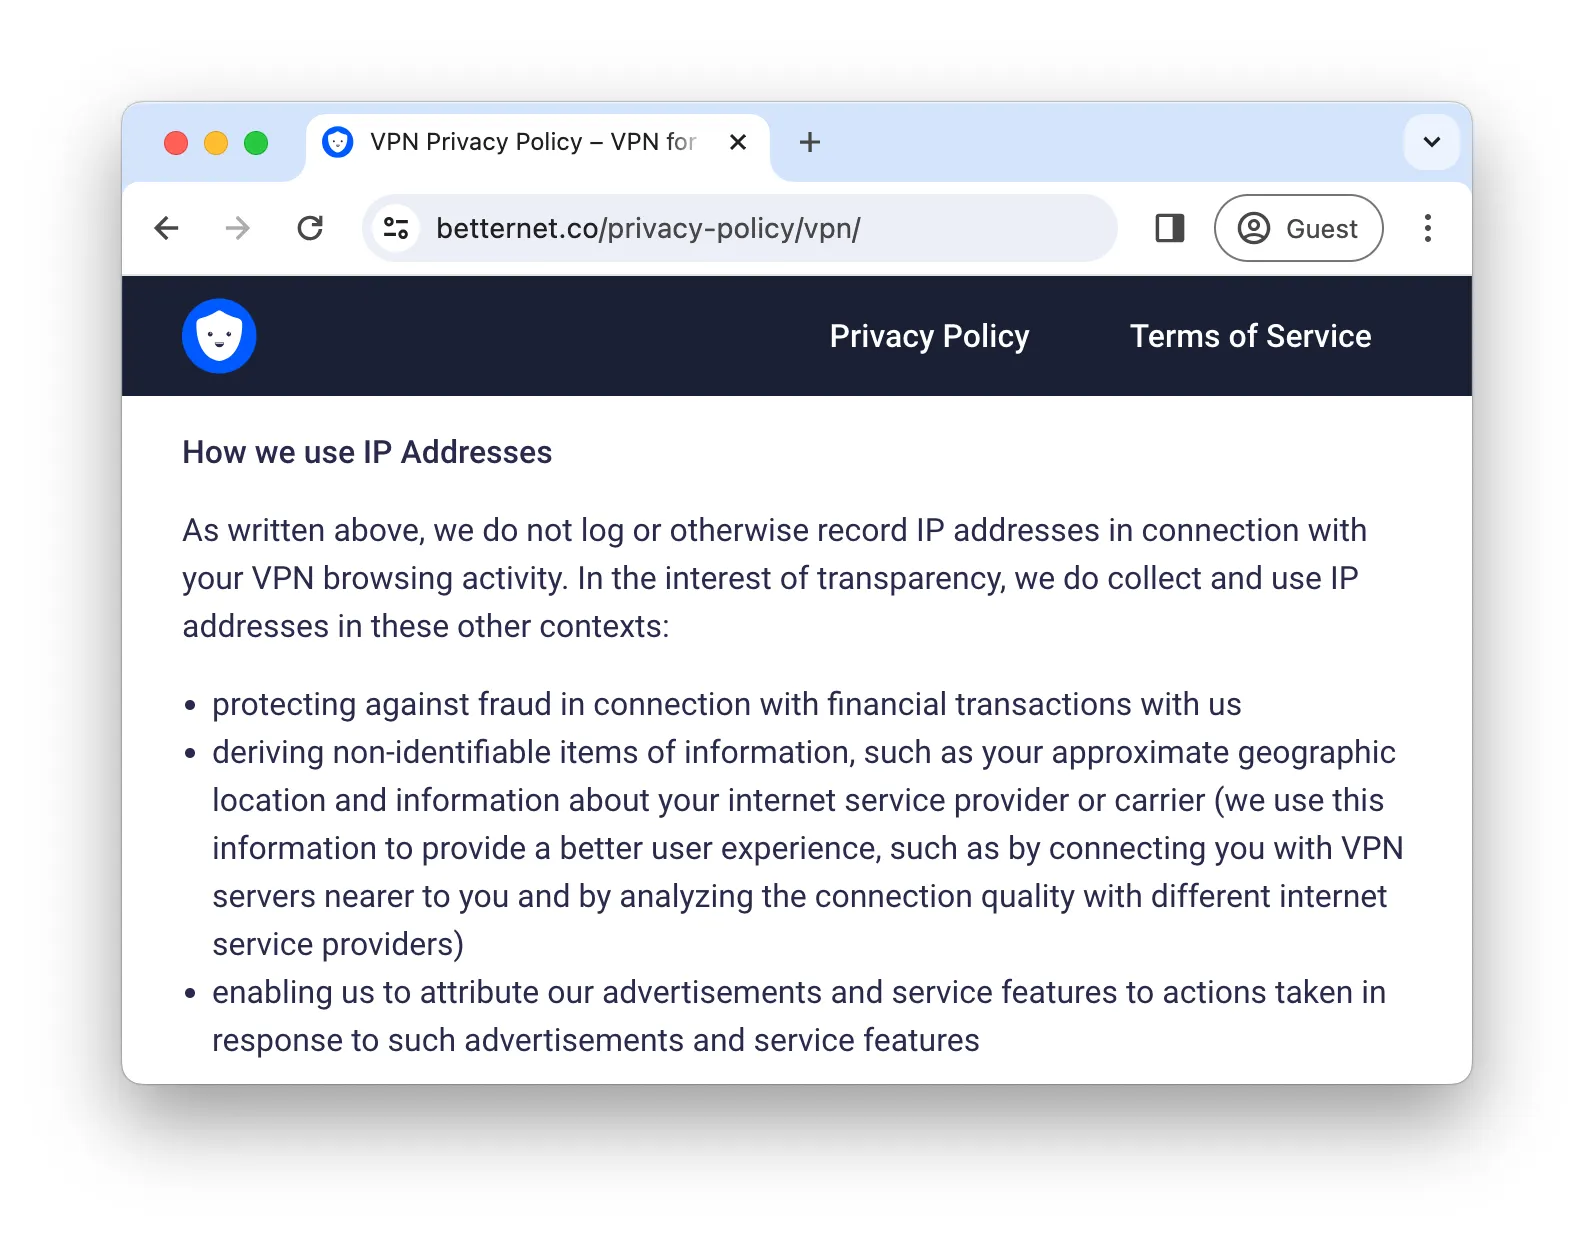 Extract from Betternet's privacy policy